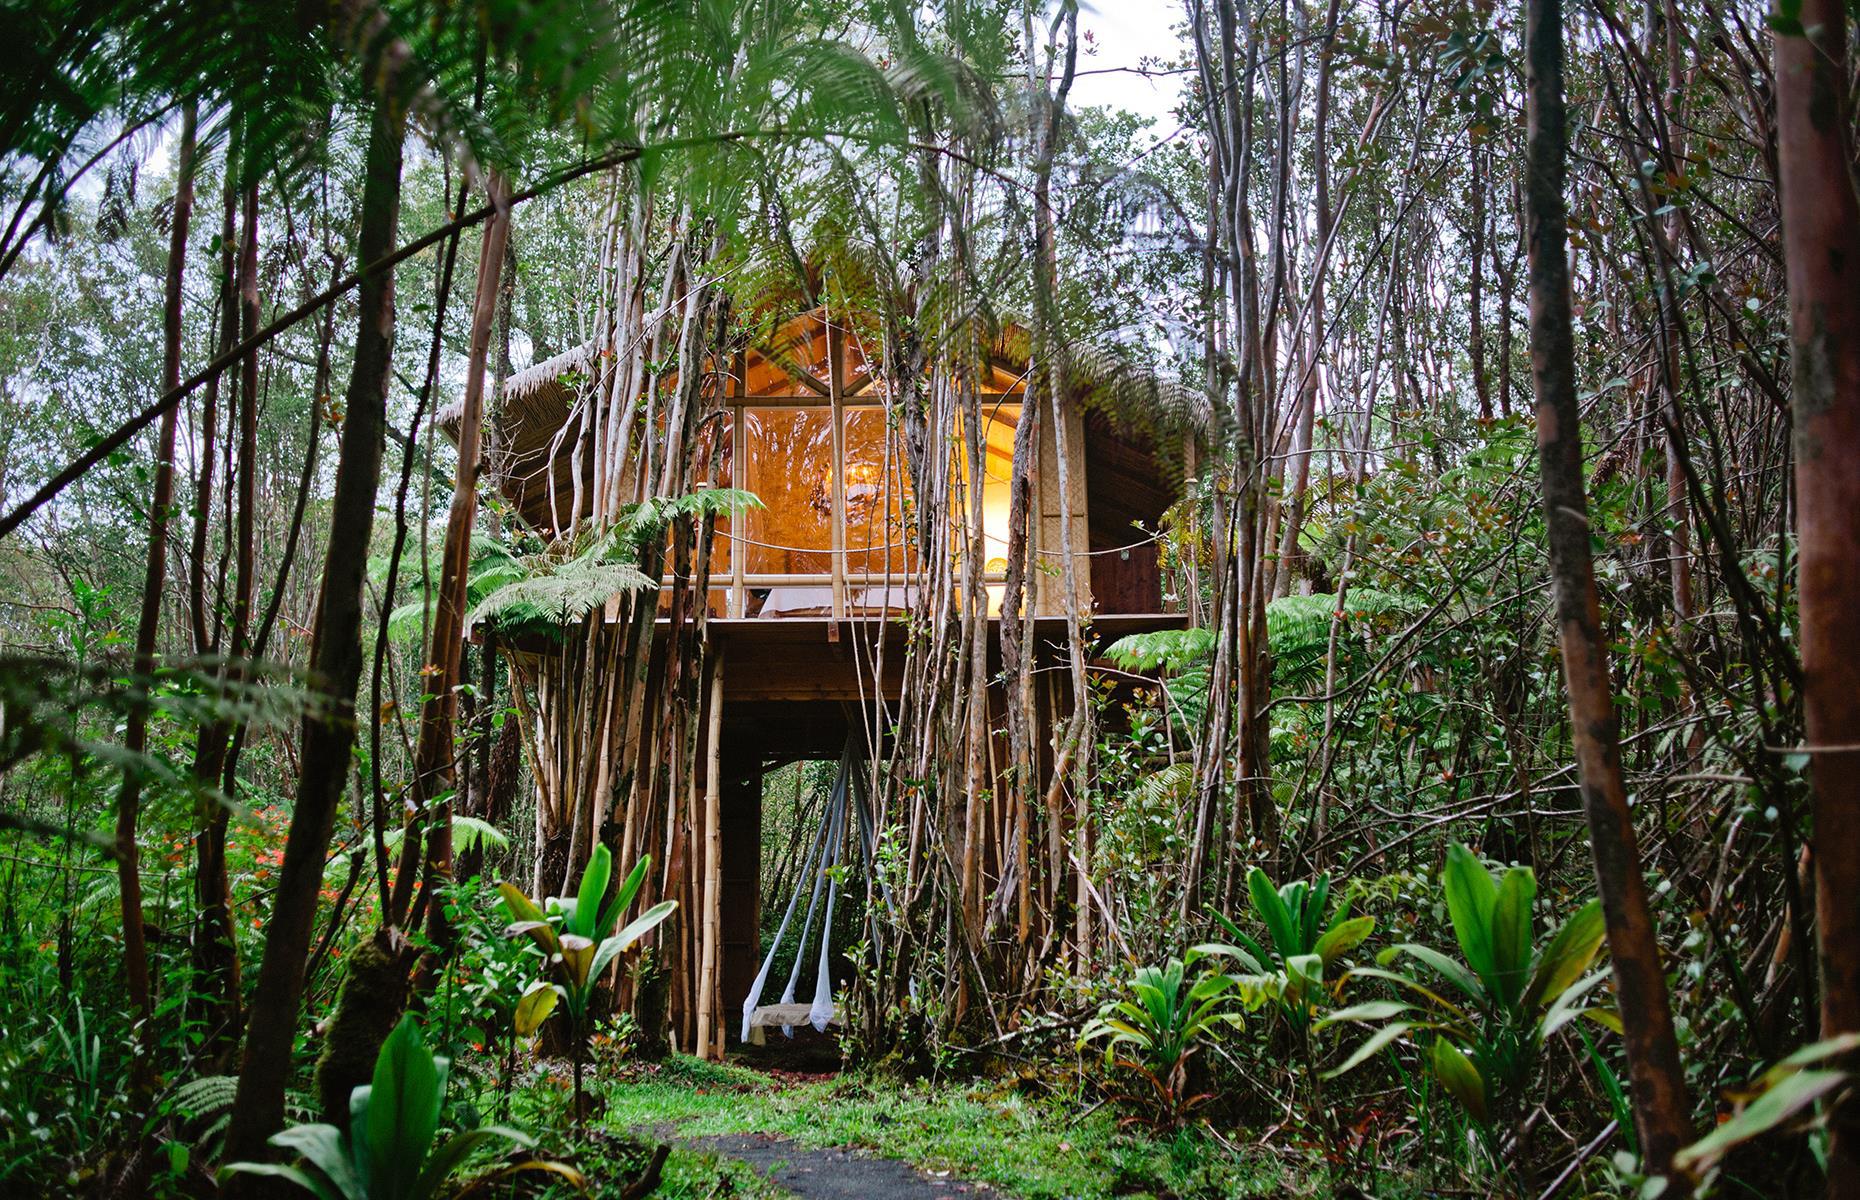 <p>Guests can sleep nestled among the trees in <a href="https://www.airbnb.co.uk/rooms/2615058">this secluded haven</a> on the outskirts of Hawaii’s Volcanoes National Park. A wraparound veranda gives panoramic views over the rainforest while the shower cascades with naturally caught rainwater. Falling asleep to the sound of coquí frogs chirping away and waking up surrounded by the stunning jungle scenery is a one-of-a-kind experience.</p>  <p><a href="https://www.loveexploring.com/galleries/90005/the-best-airbnb-under-150-dollars-in-every-state?page=1"><strong>Discover the best Airbnb under $150 in every state here</strong></a></p>